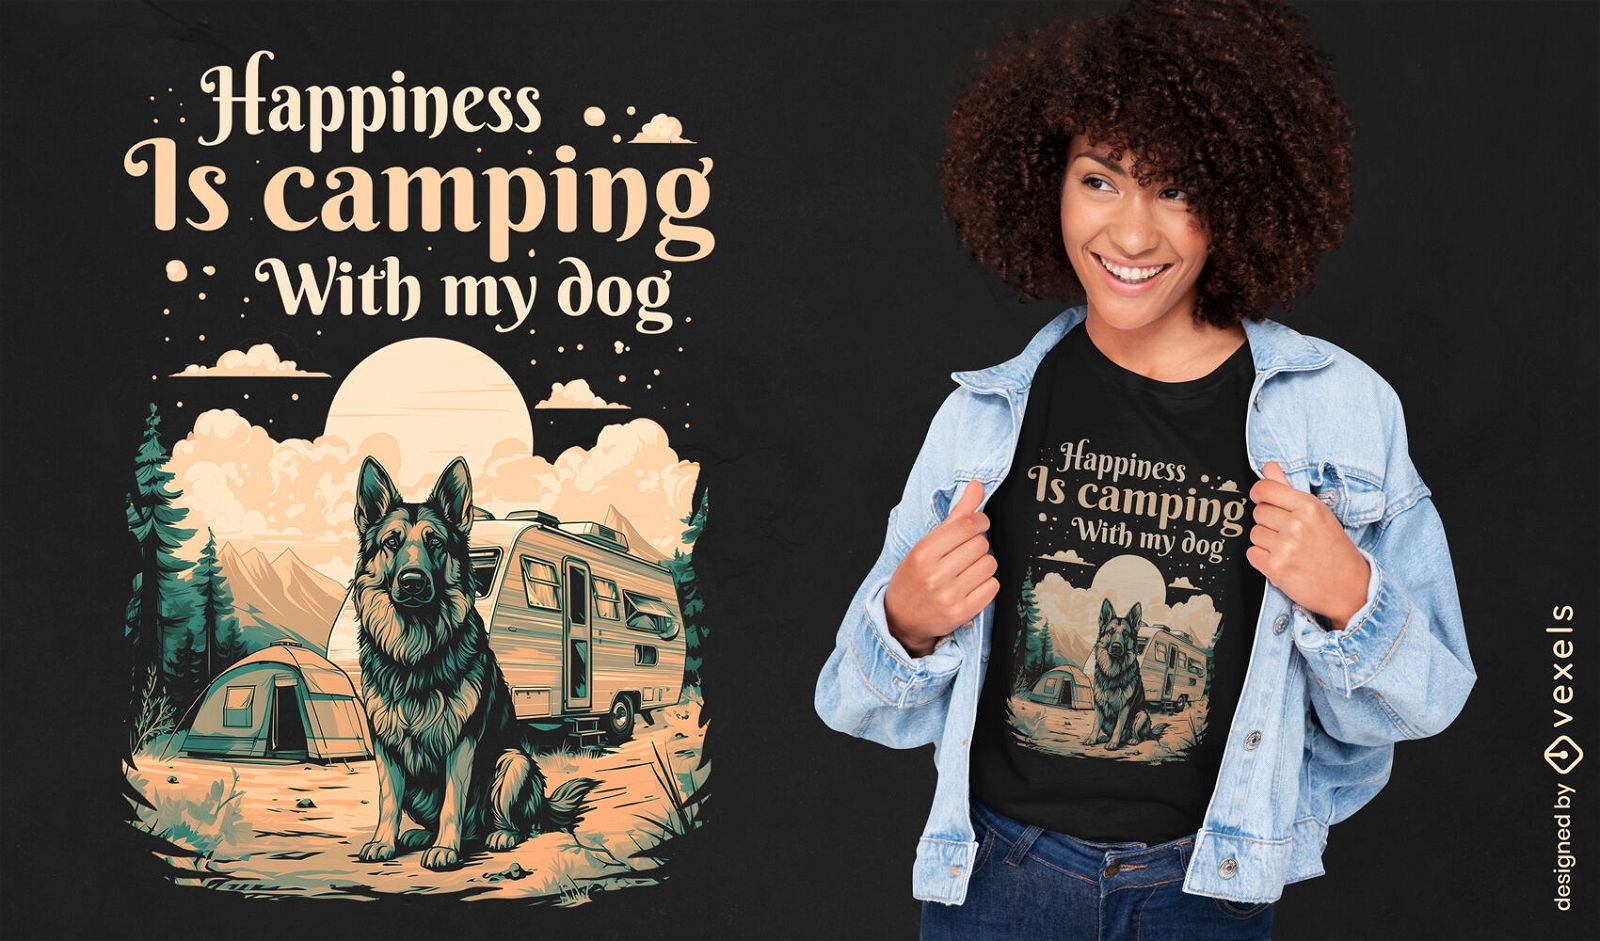 Camping with dog t-shirt design